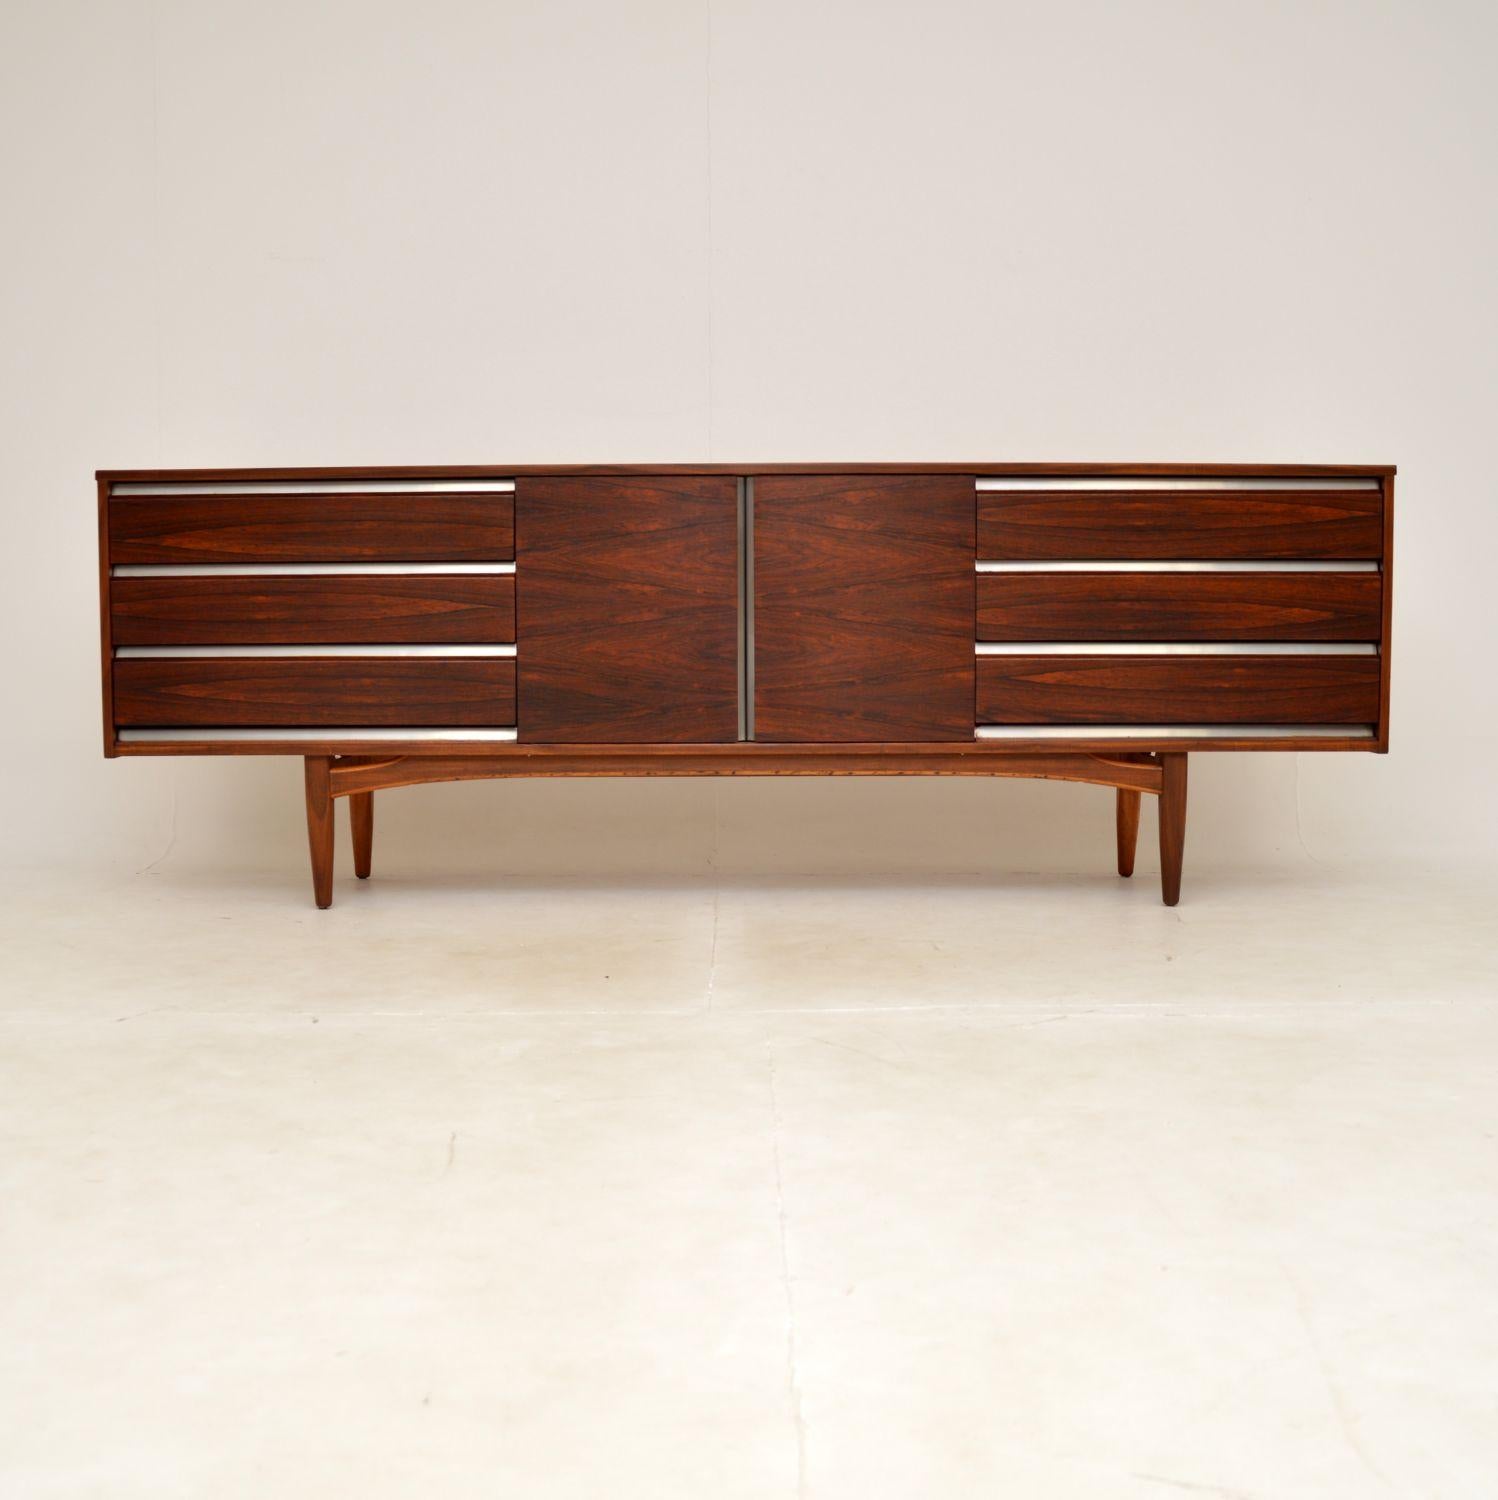 A very stylish and impressive vintage sideboard, walnut and chrome. This was made in England, it dates from the 1960’s.

It is of superb quality, it has an absolutely gorgeous front with stunning grain patterns. The top and sides are walnut, the